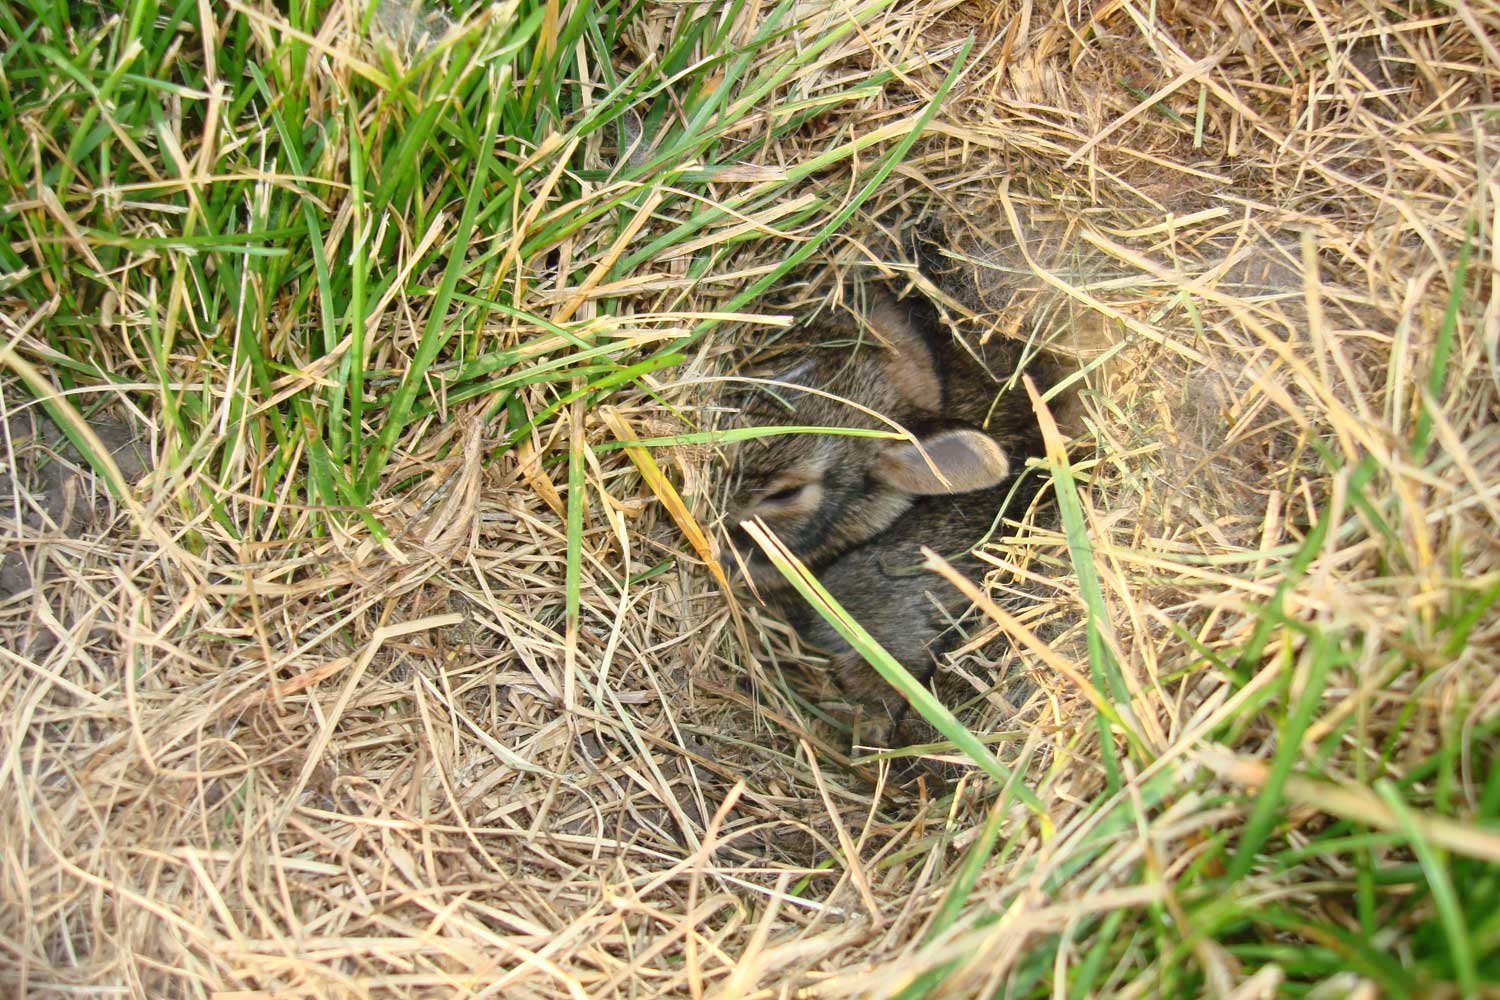 A hole in the grass covered with dried grasses with baby rabbits visible inside.